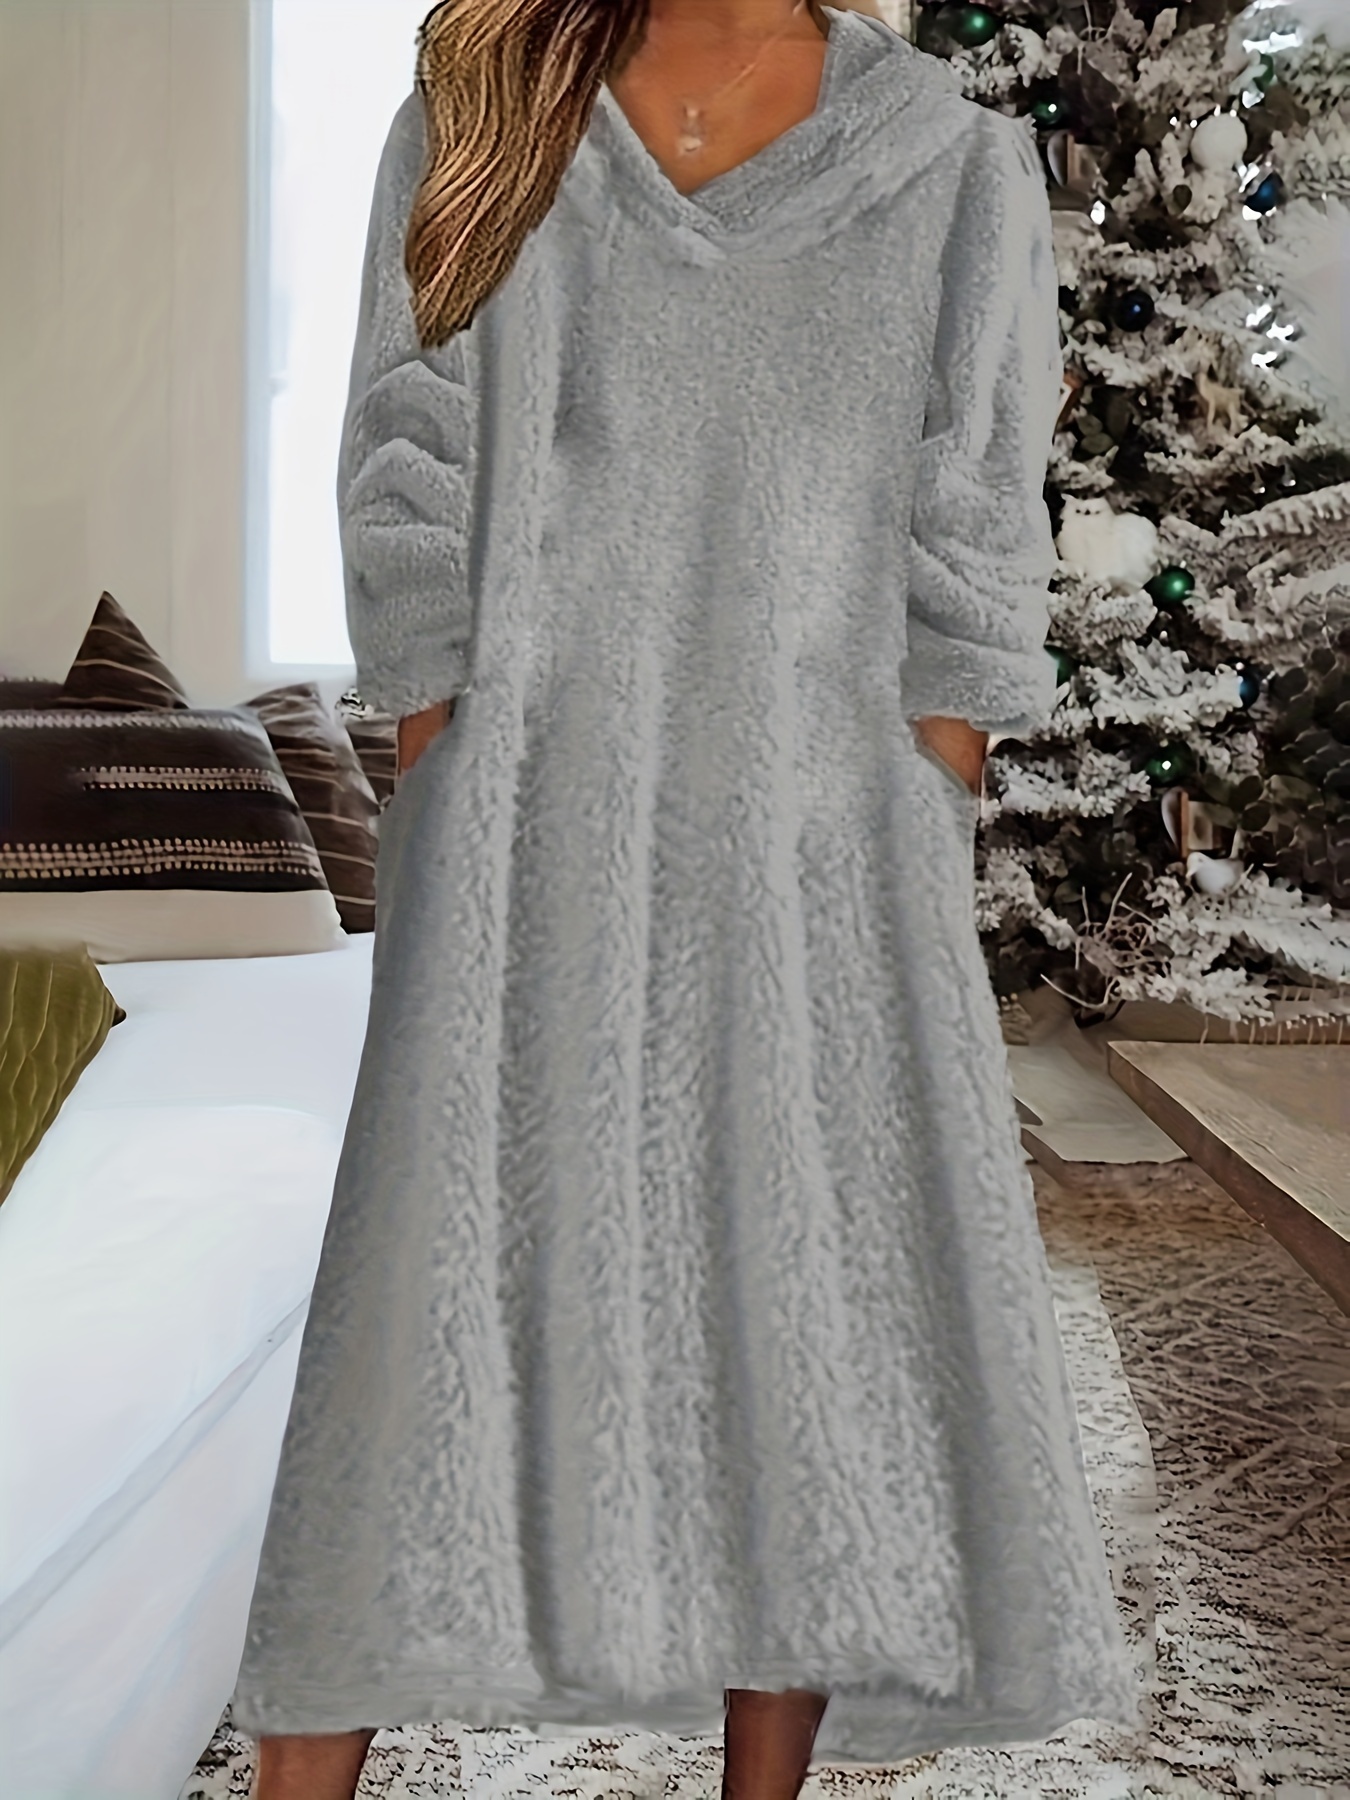 teddy hooded dress casual long sleeve winter warm dress womens clothing details 3